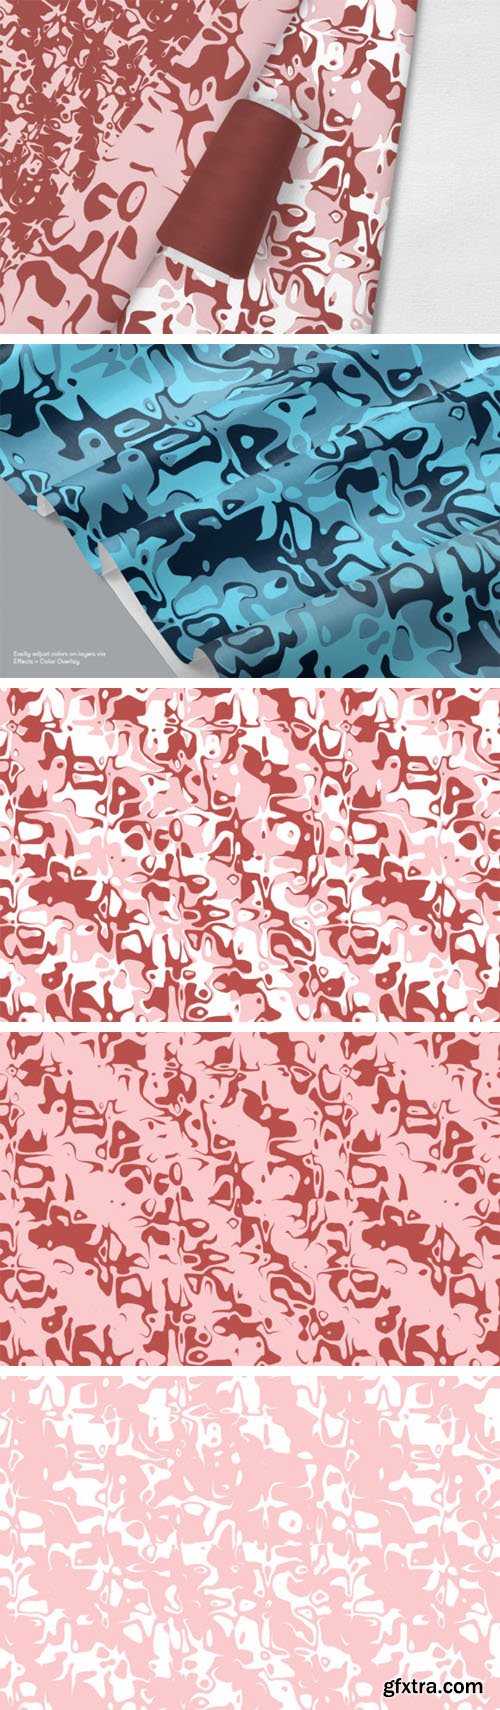 Abstract Organic Patterns PSD Template